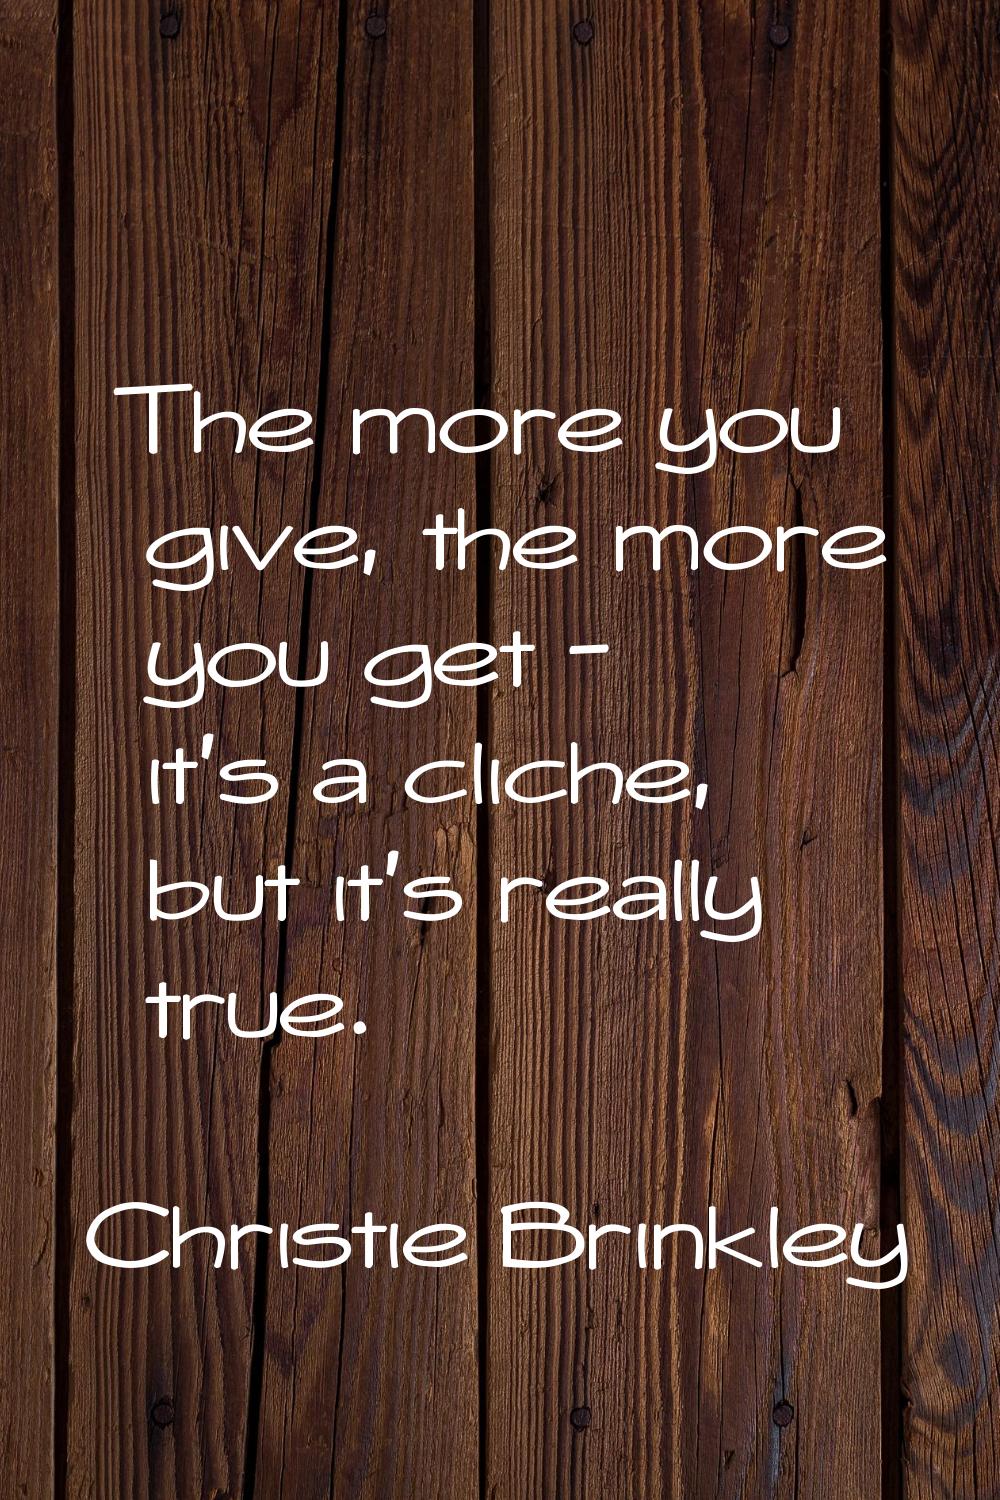 The more you give, the more you get - it's a cliche, but it's really true.